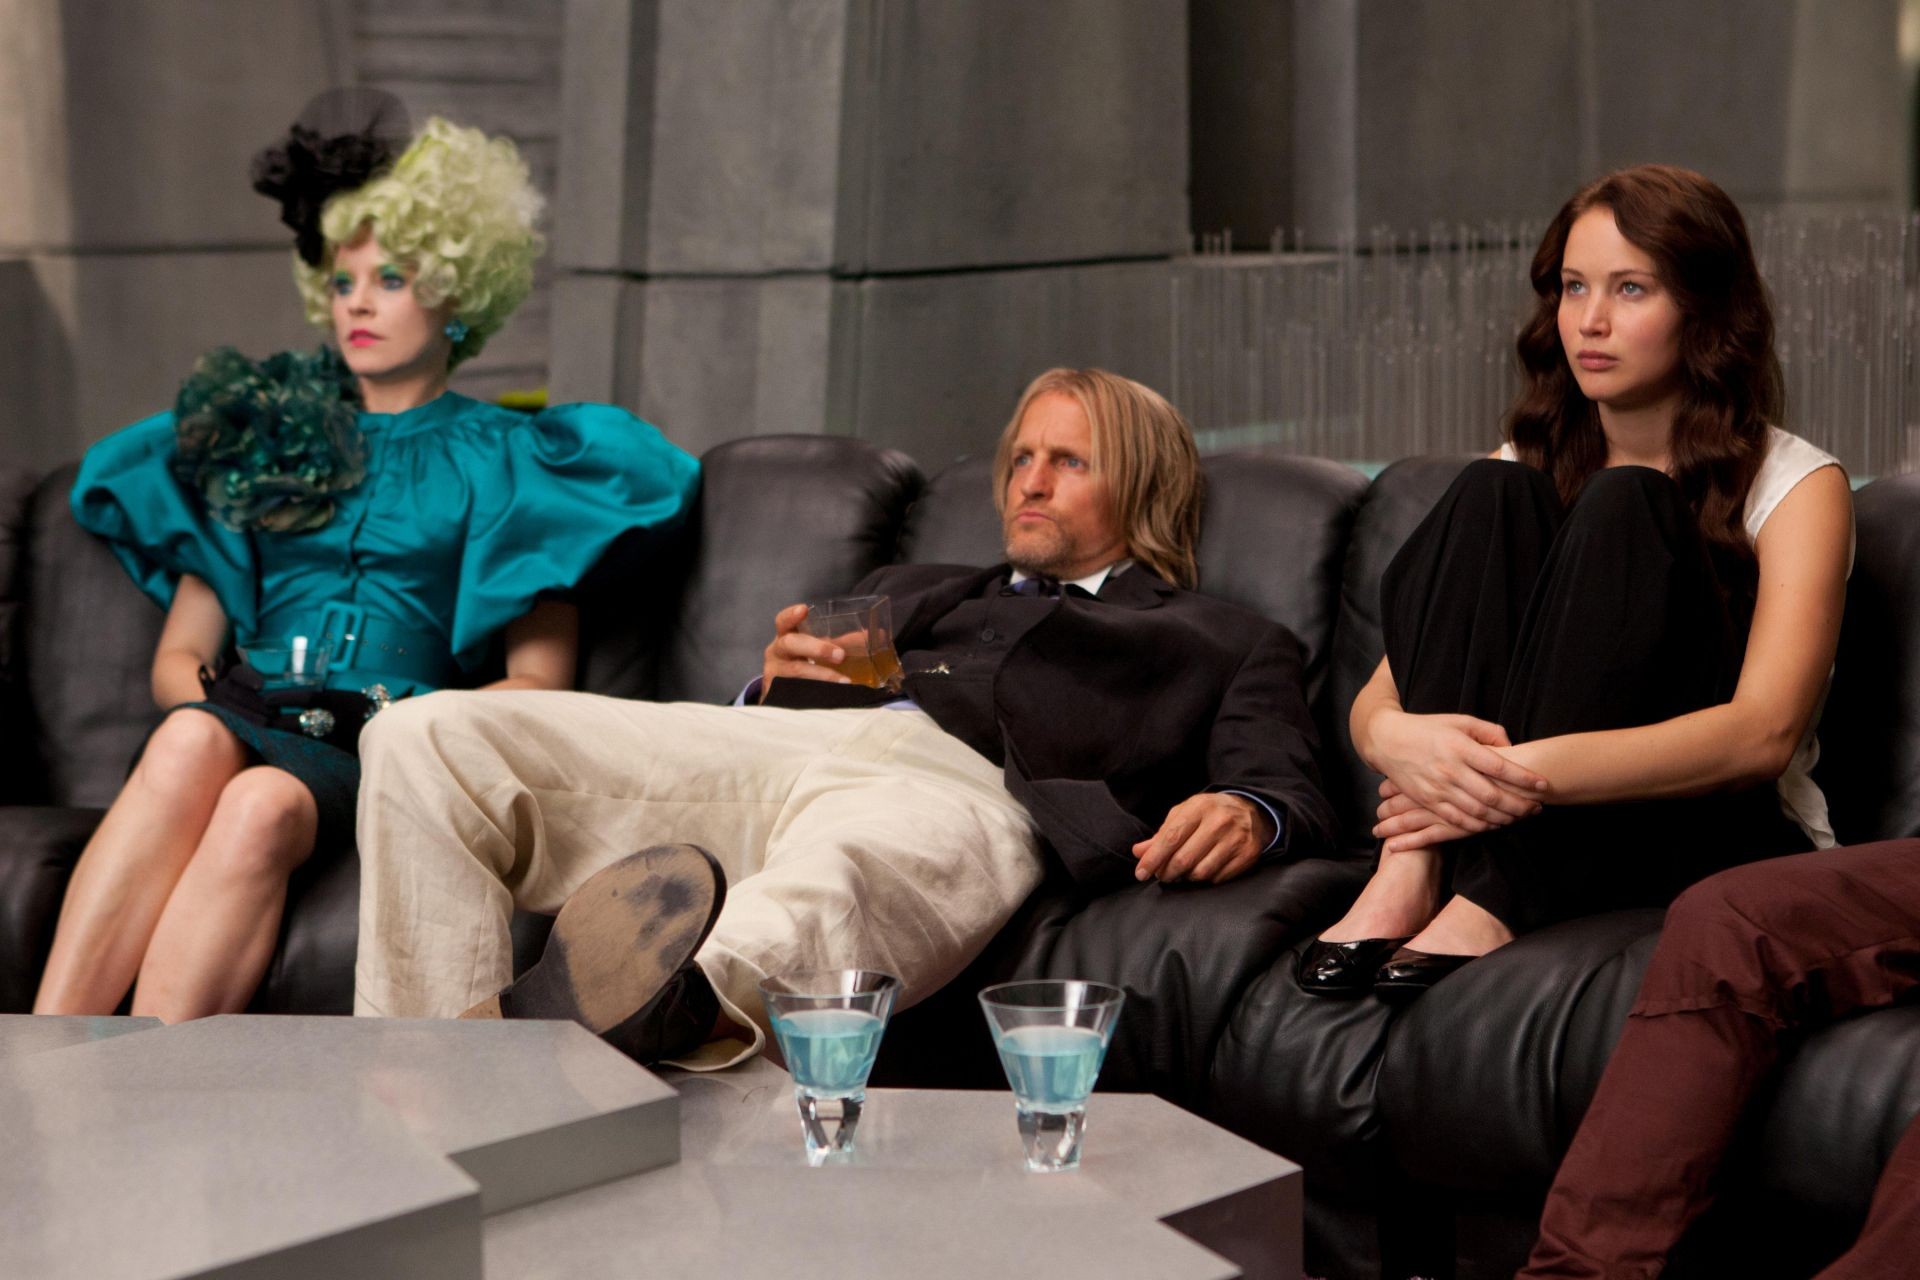 Elizabeth Banks, Woody Harrelson and Jennifer Lawrence in Lionsgate Films' The Hunger Games (2012). Photo credit by Murray Close.